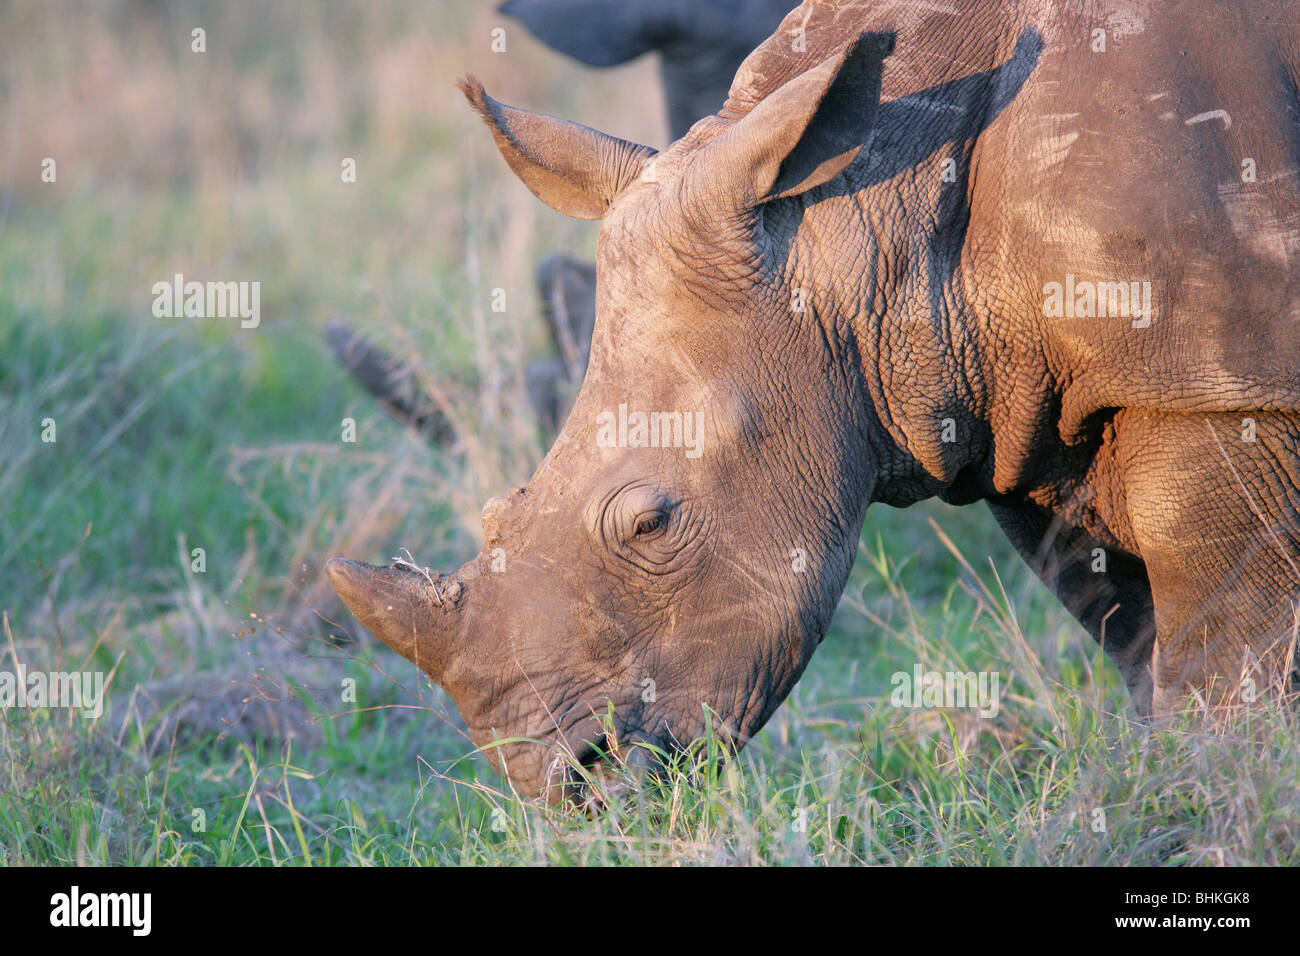 A Rhino grazing in the wild in South Africa Stock Photo